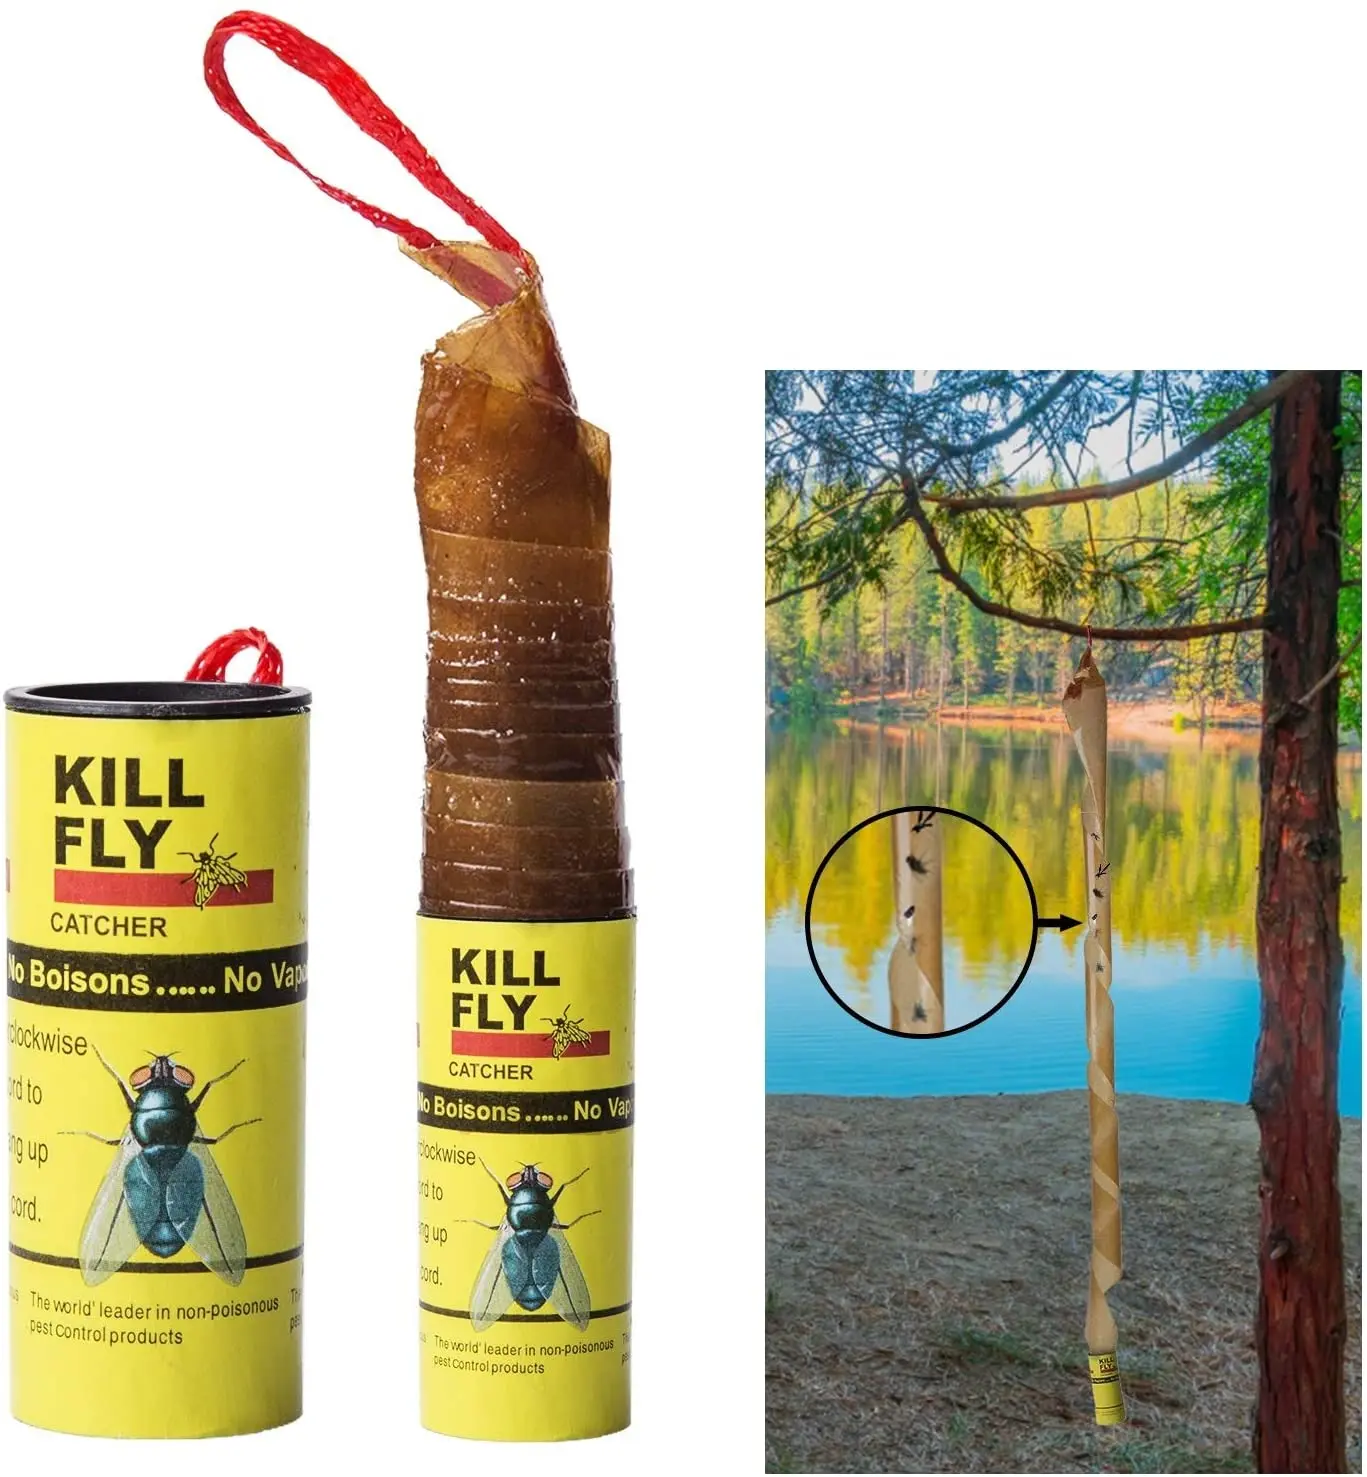 https://ae01.alicdn.com/kf/H2bcc7febcb4d46bc8129d3604cddfd2et/8-32pcs-Fly-Glue-Trap-Powerful-Mosquito-Fly-Killer-Rolls-Sticky-Fly-Paper-Eliminate-Flies-Insect.jpg